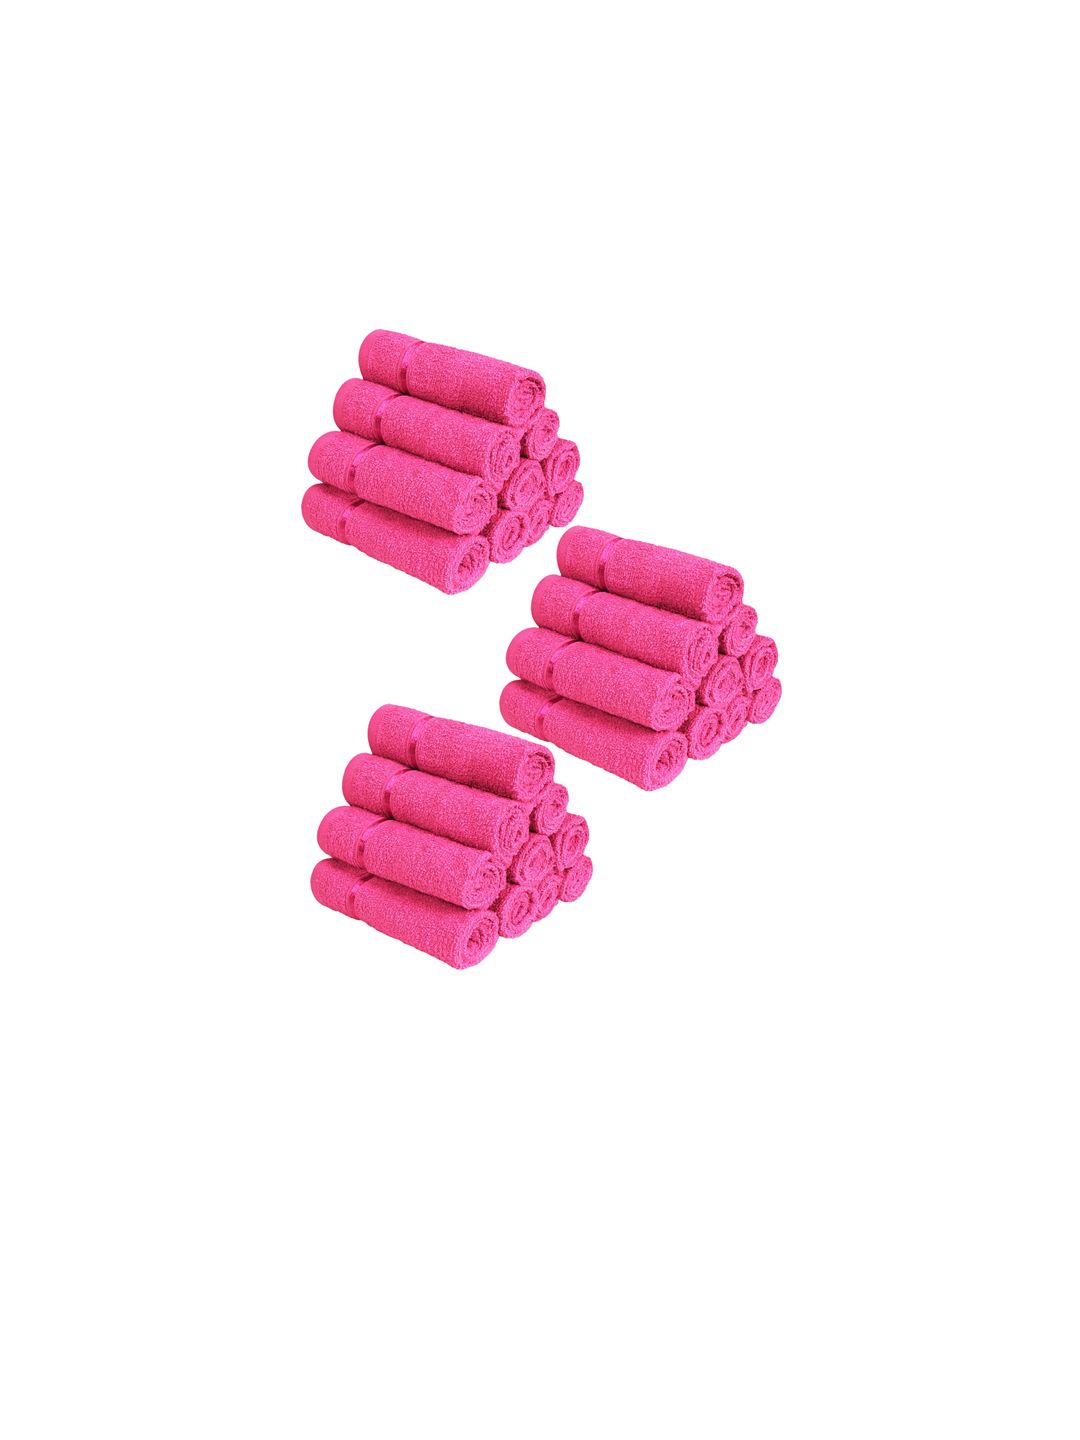 Story@home Set Of 30 Pink Solid 450 GSM Pure Cotton Face Towels Price in India